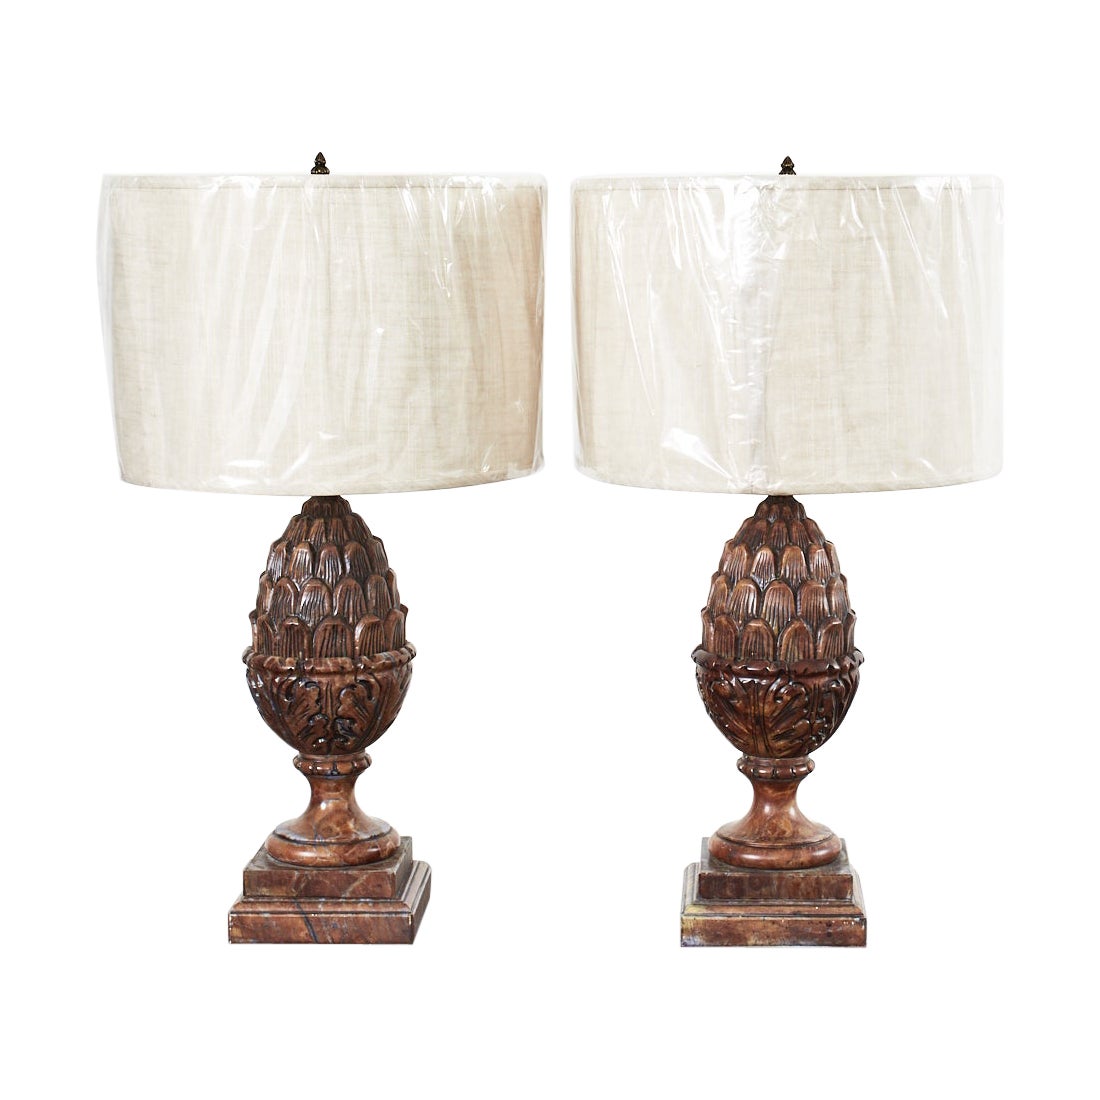 Pair of Neoclassical Style Carved Alabaster Artichoke Lamps For Sale